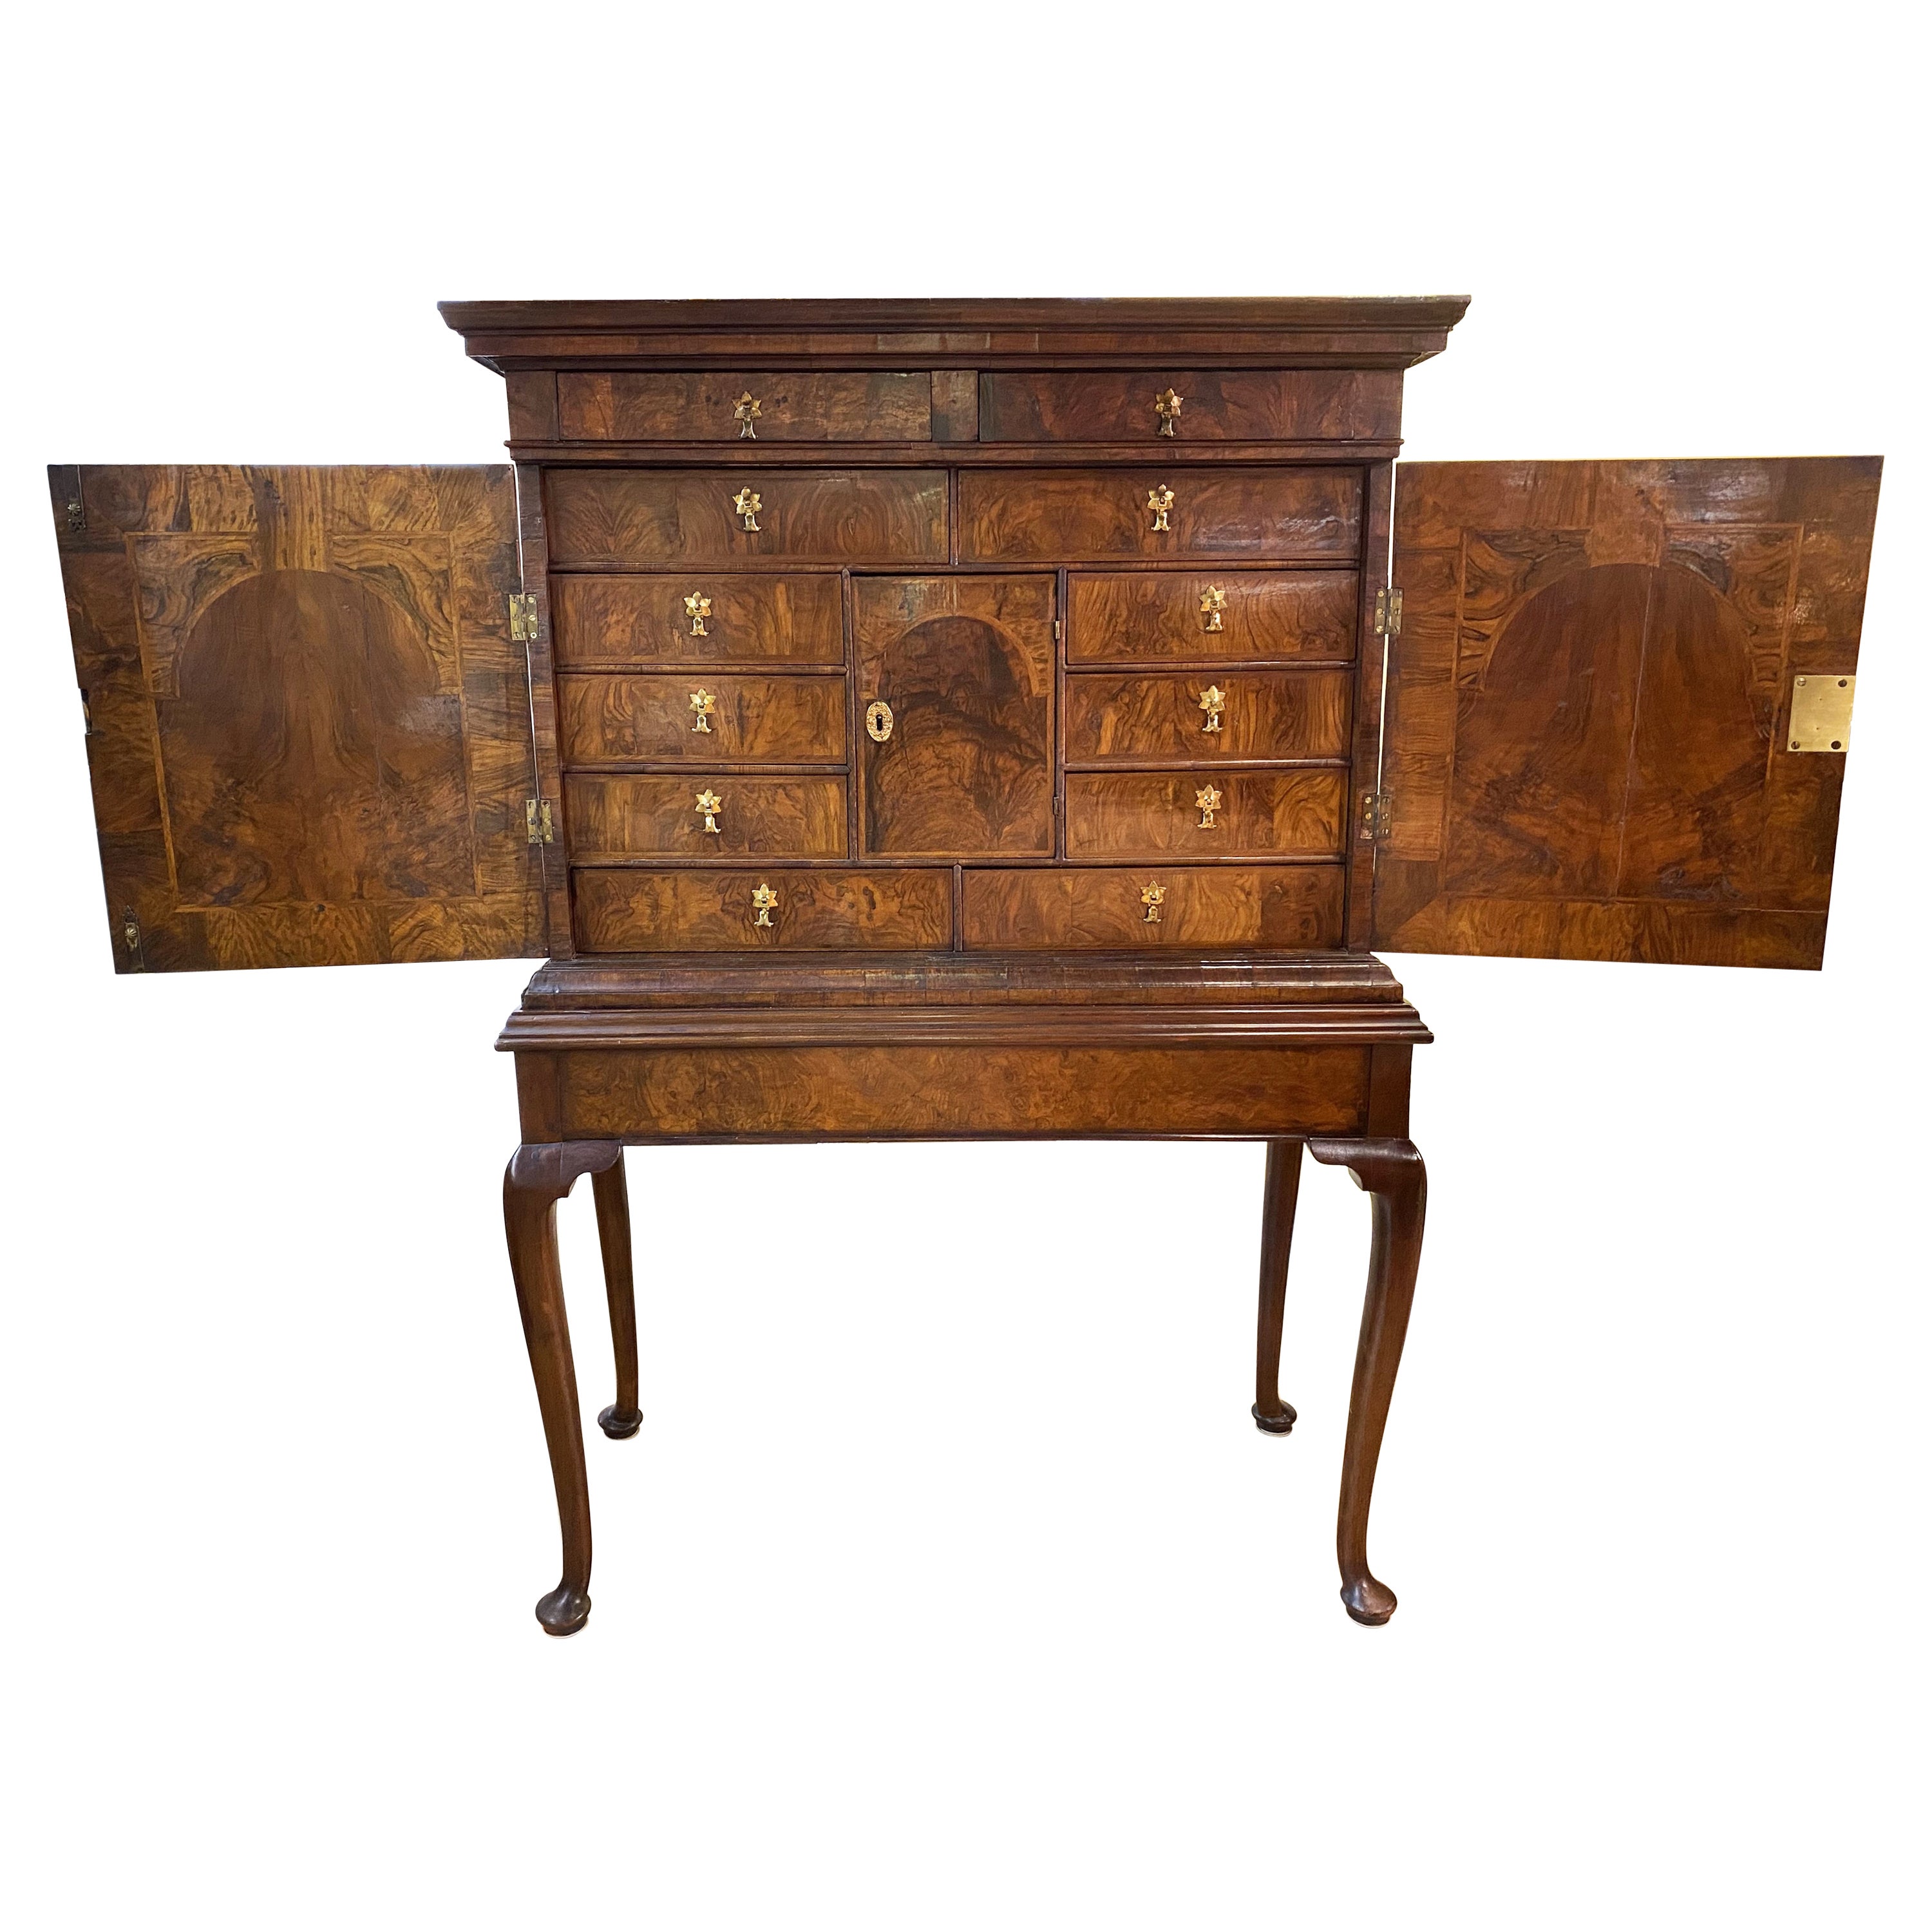 Early 18th Century Queen Anne Walnut & Burl Collector’s Cabinet on Stand For Sale